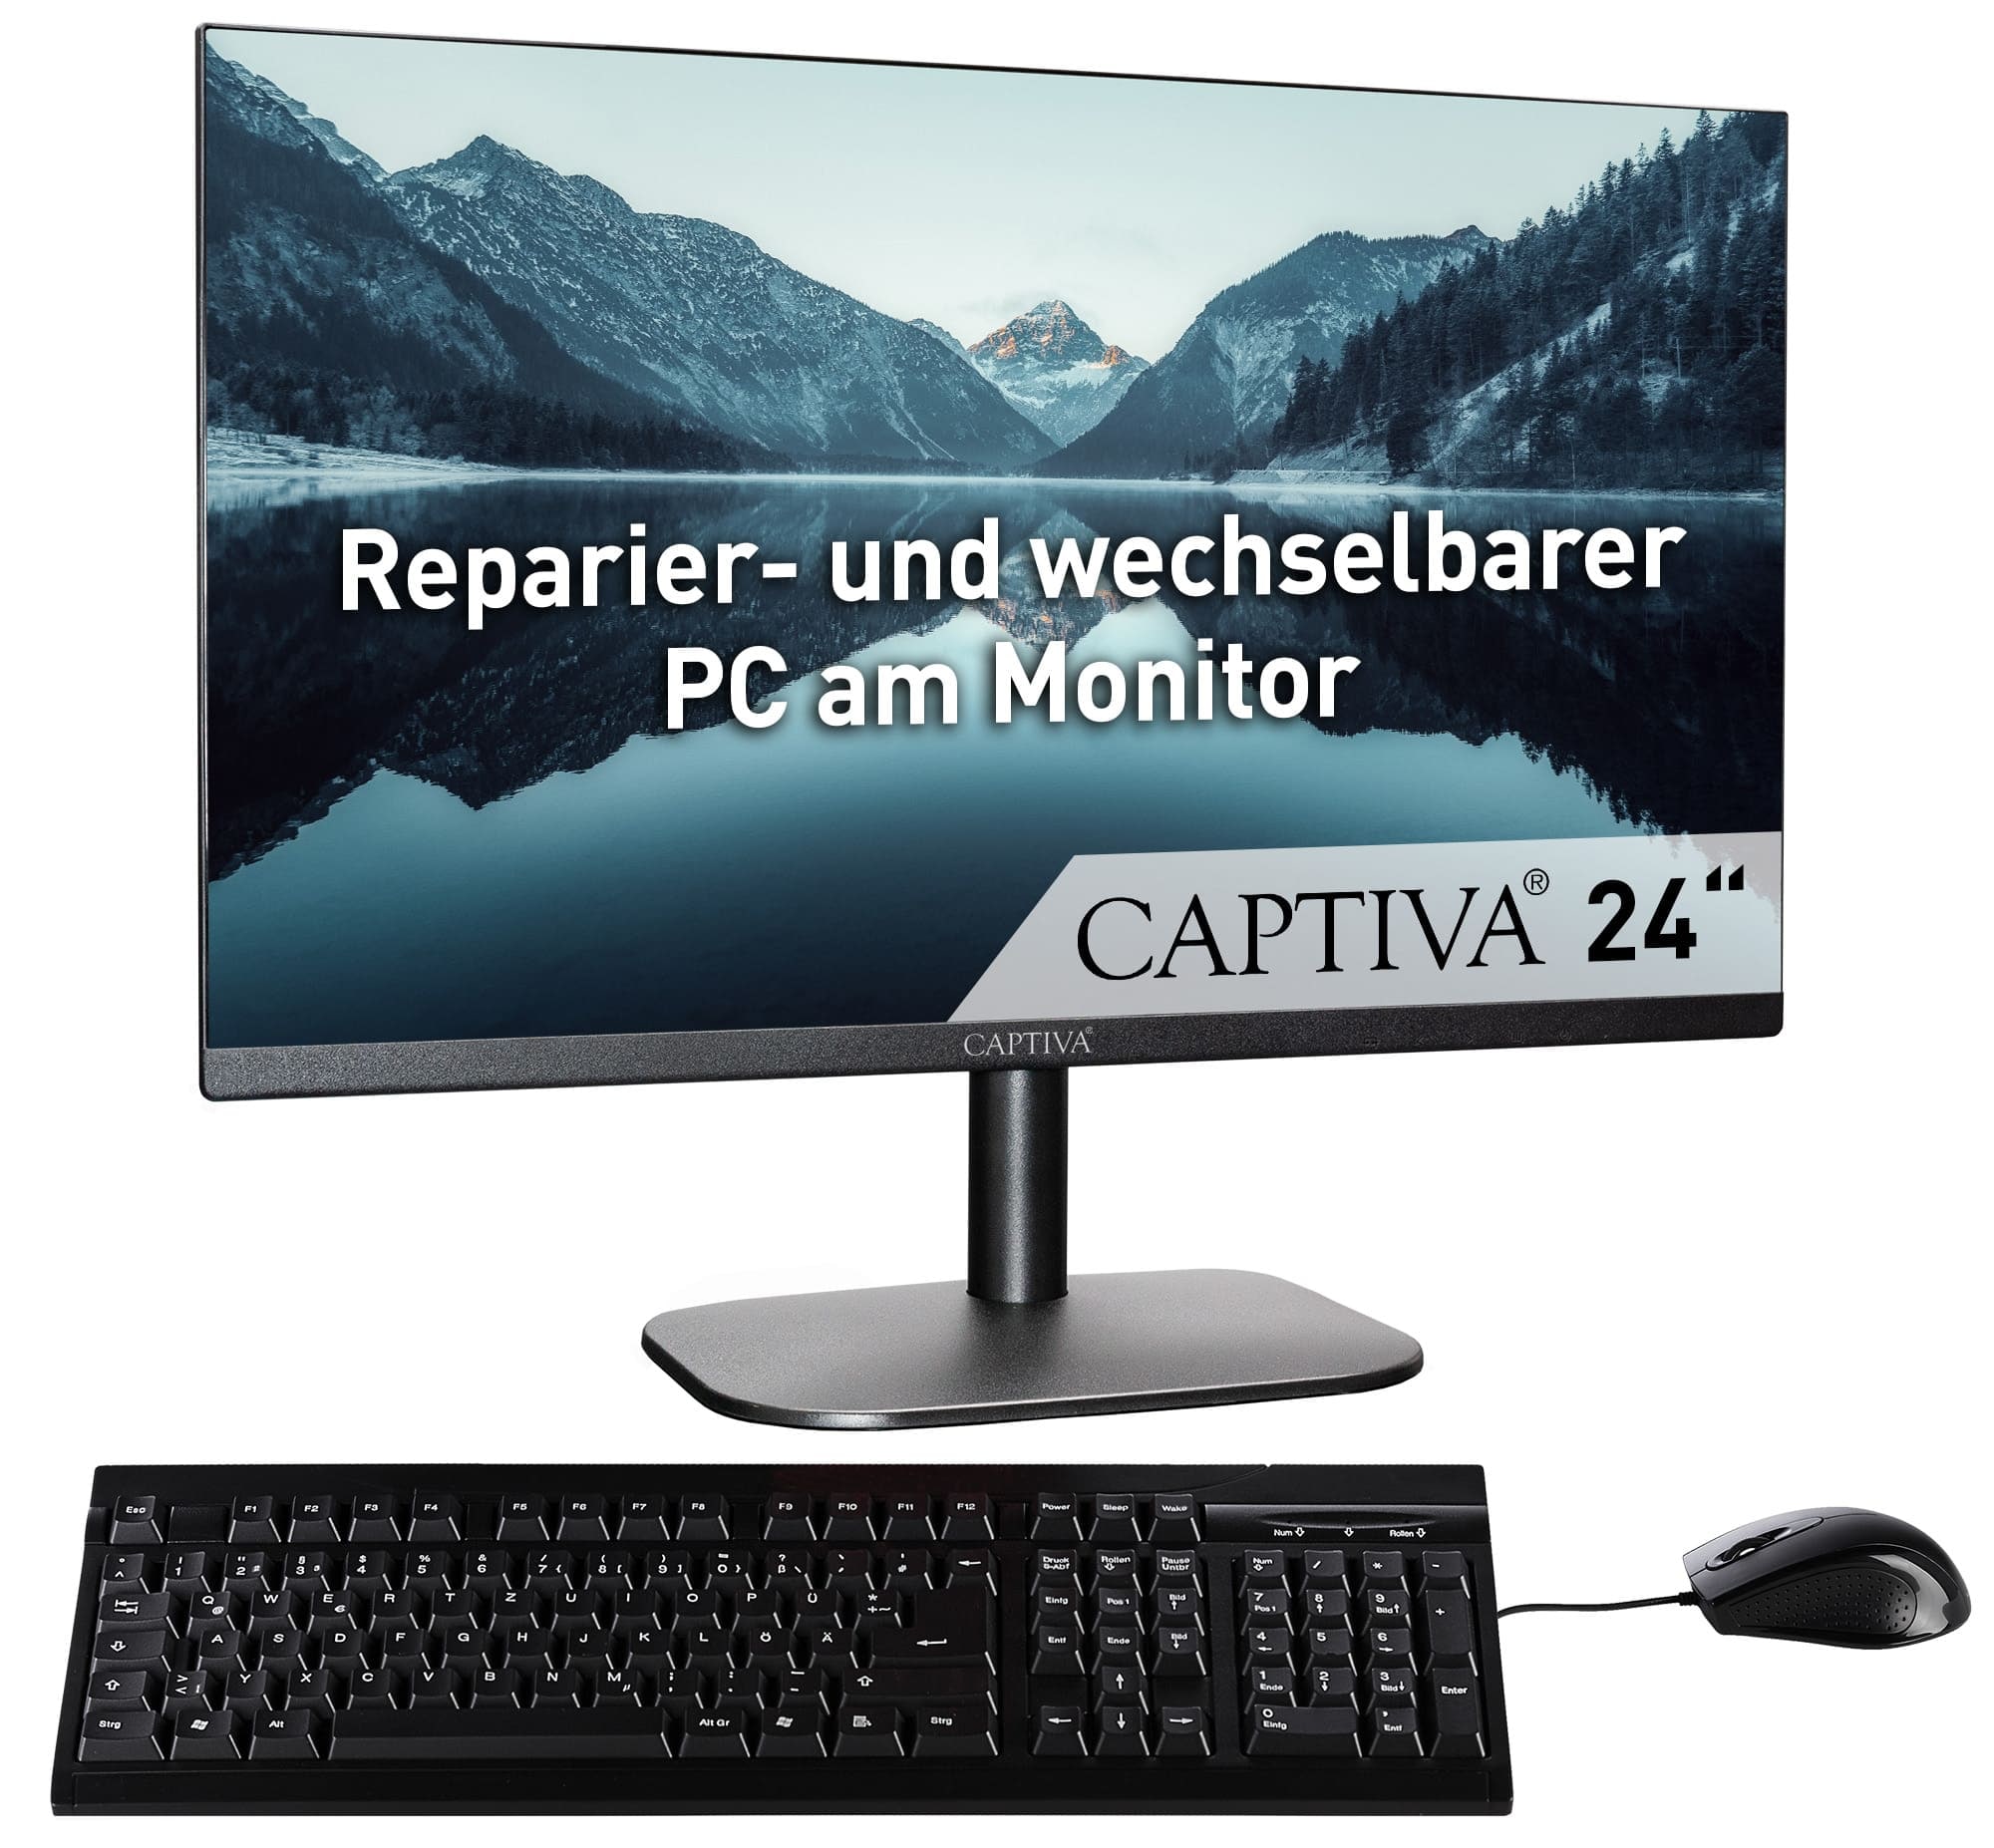 CAPTIVA All-in-One PC »All-In-One Power Starter I82-213«